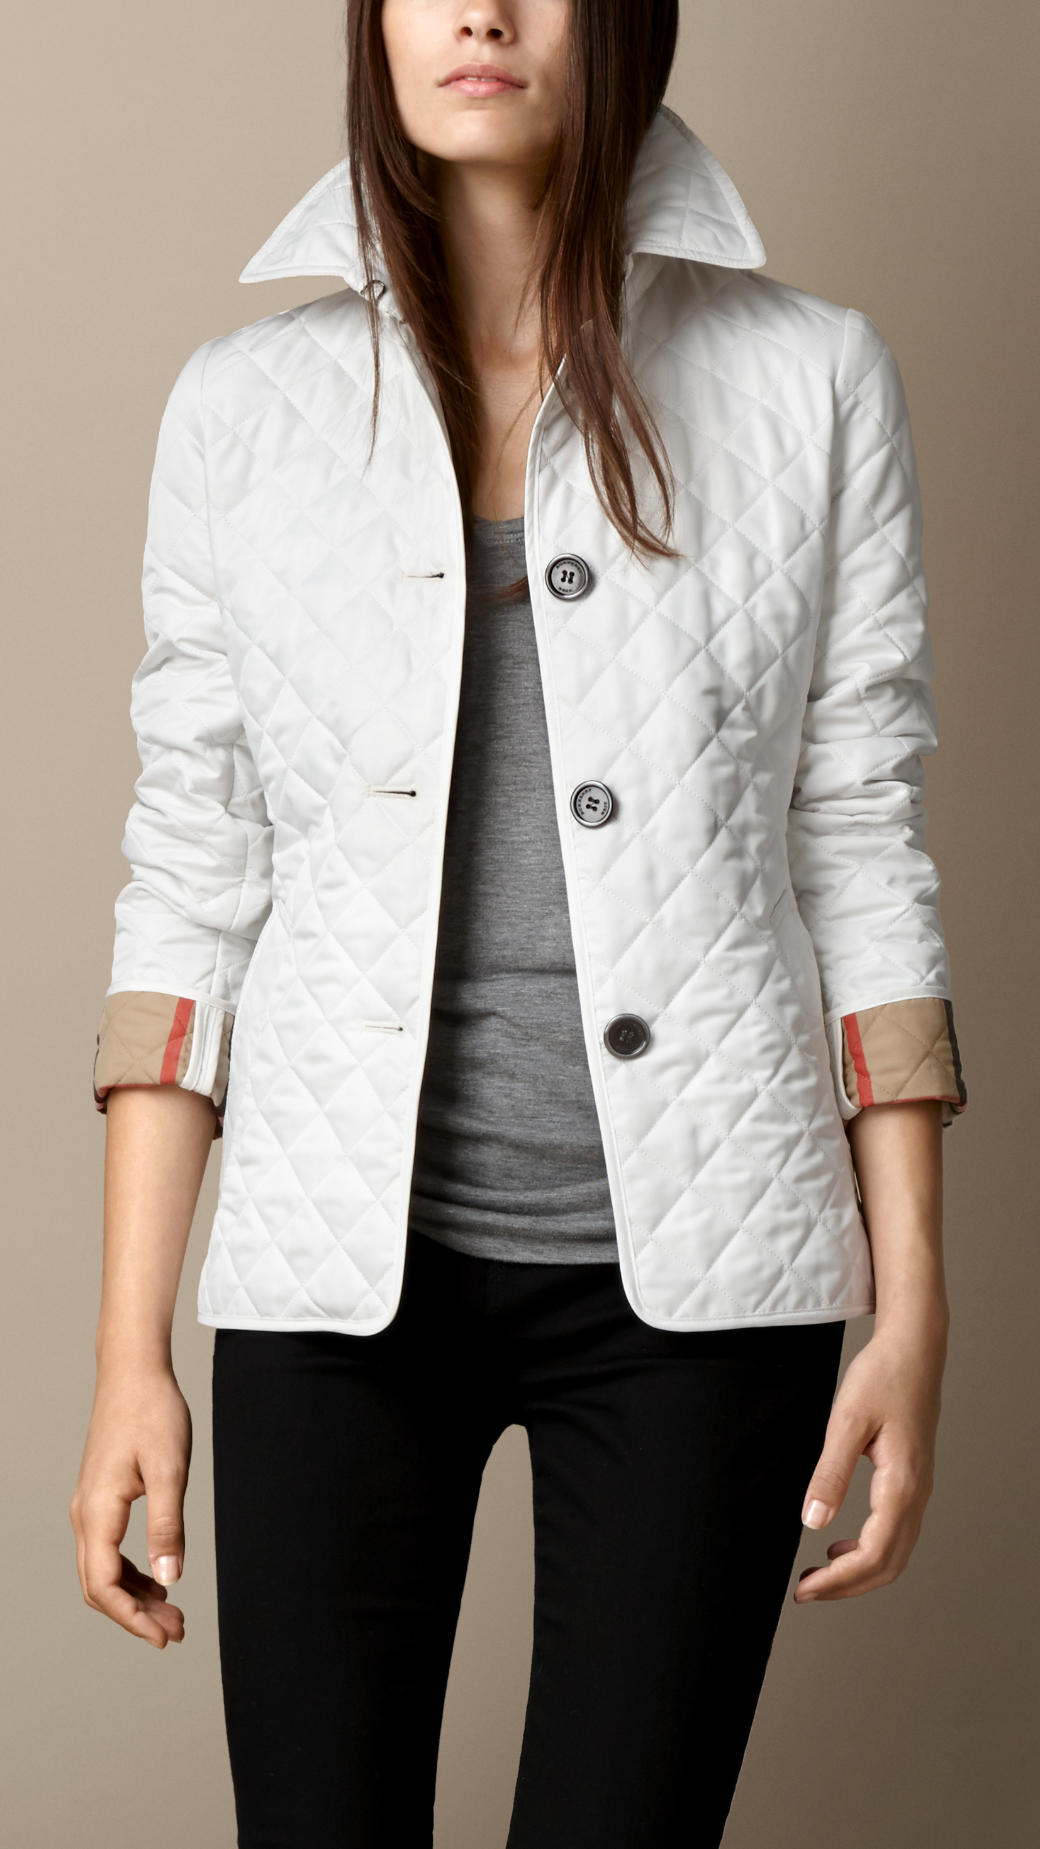 Burberry Diamond Quilted Jacket in Chalk (White) - Lyst